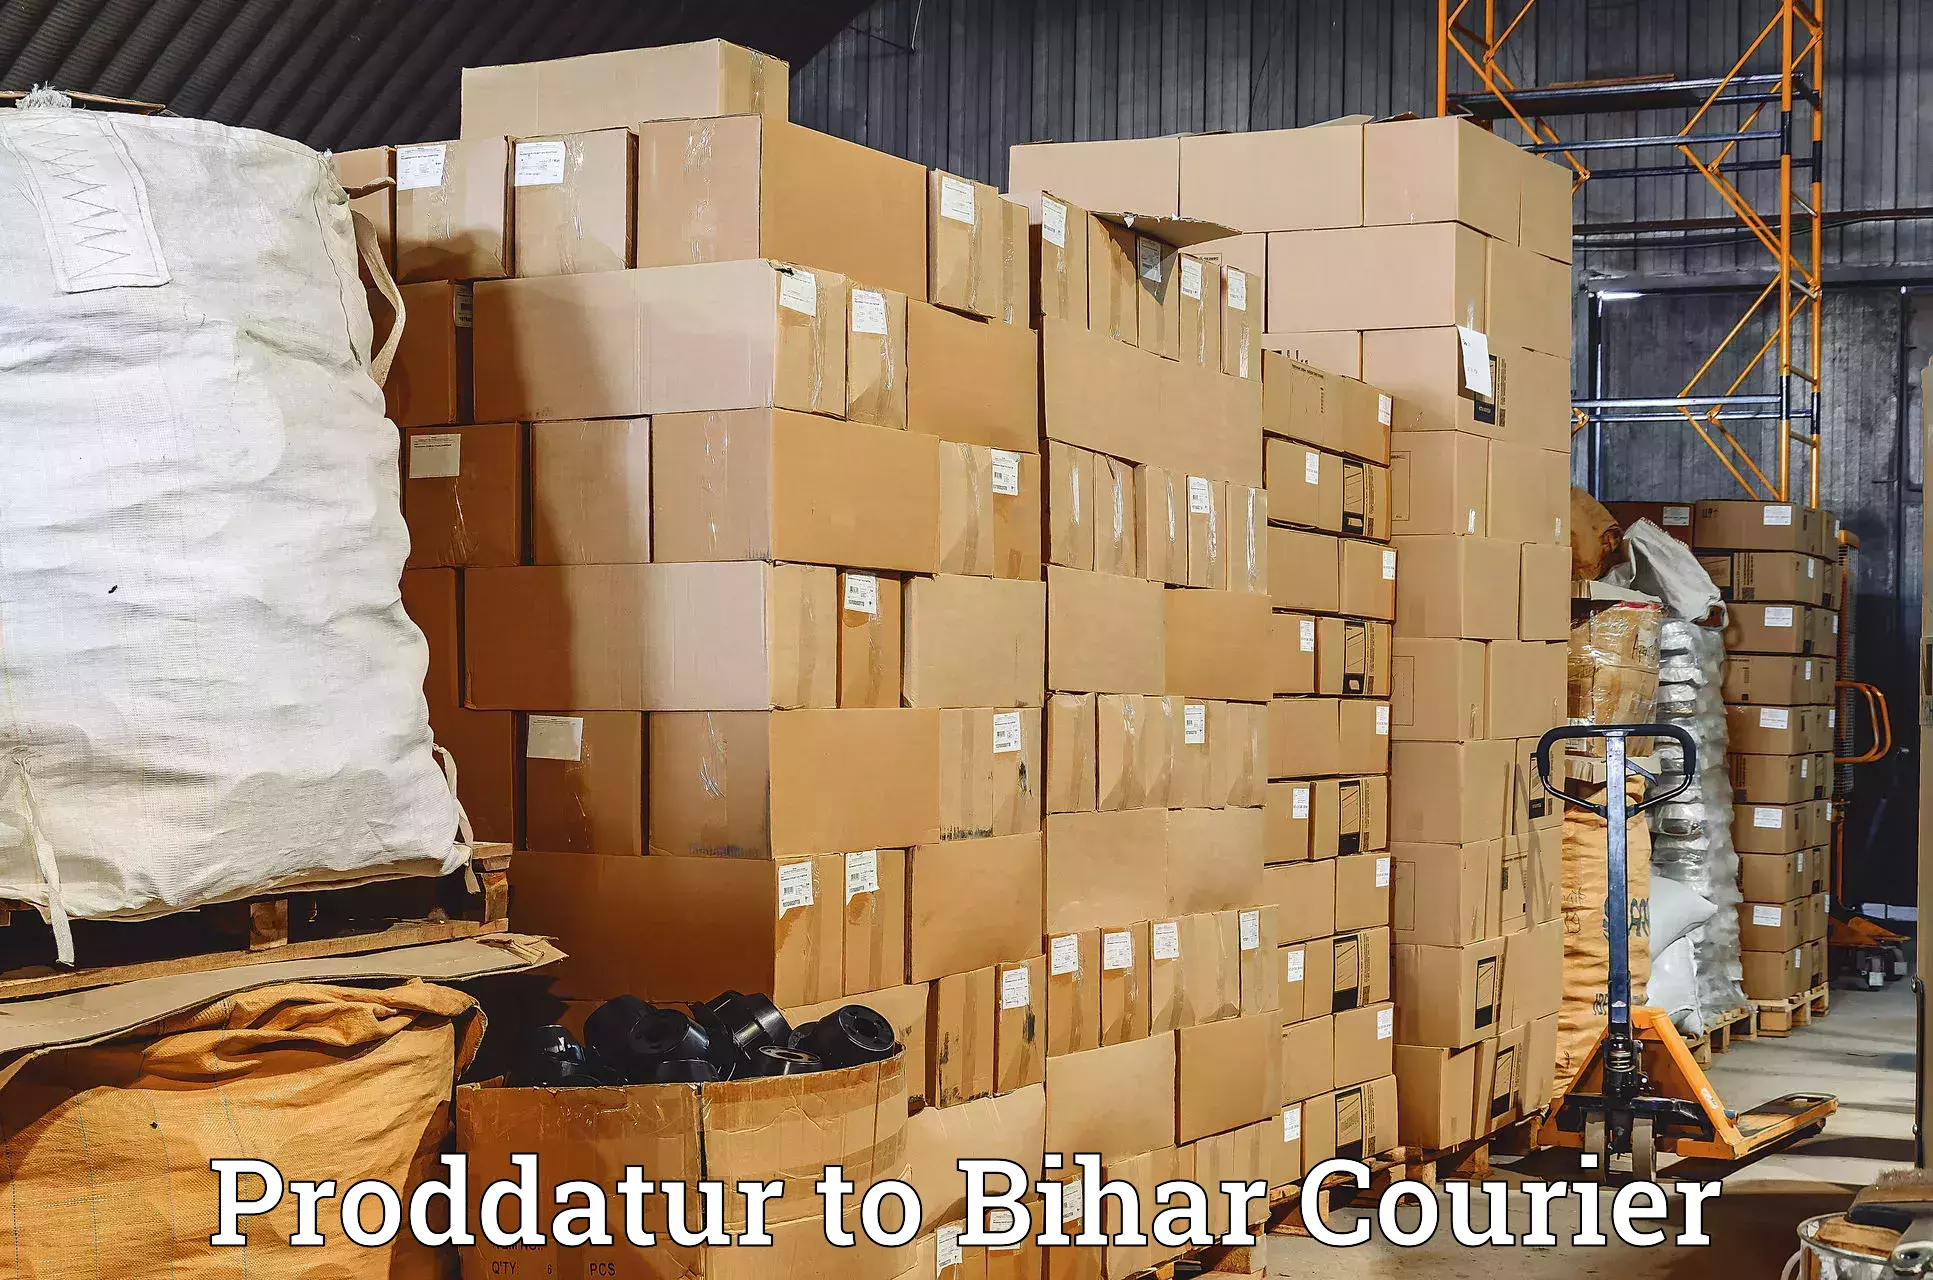 24-hour delivery options Proddatur to Buxar